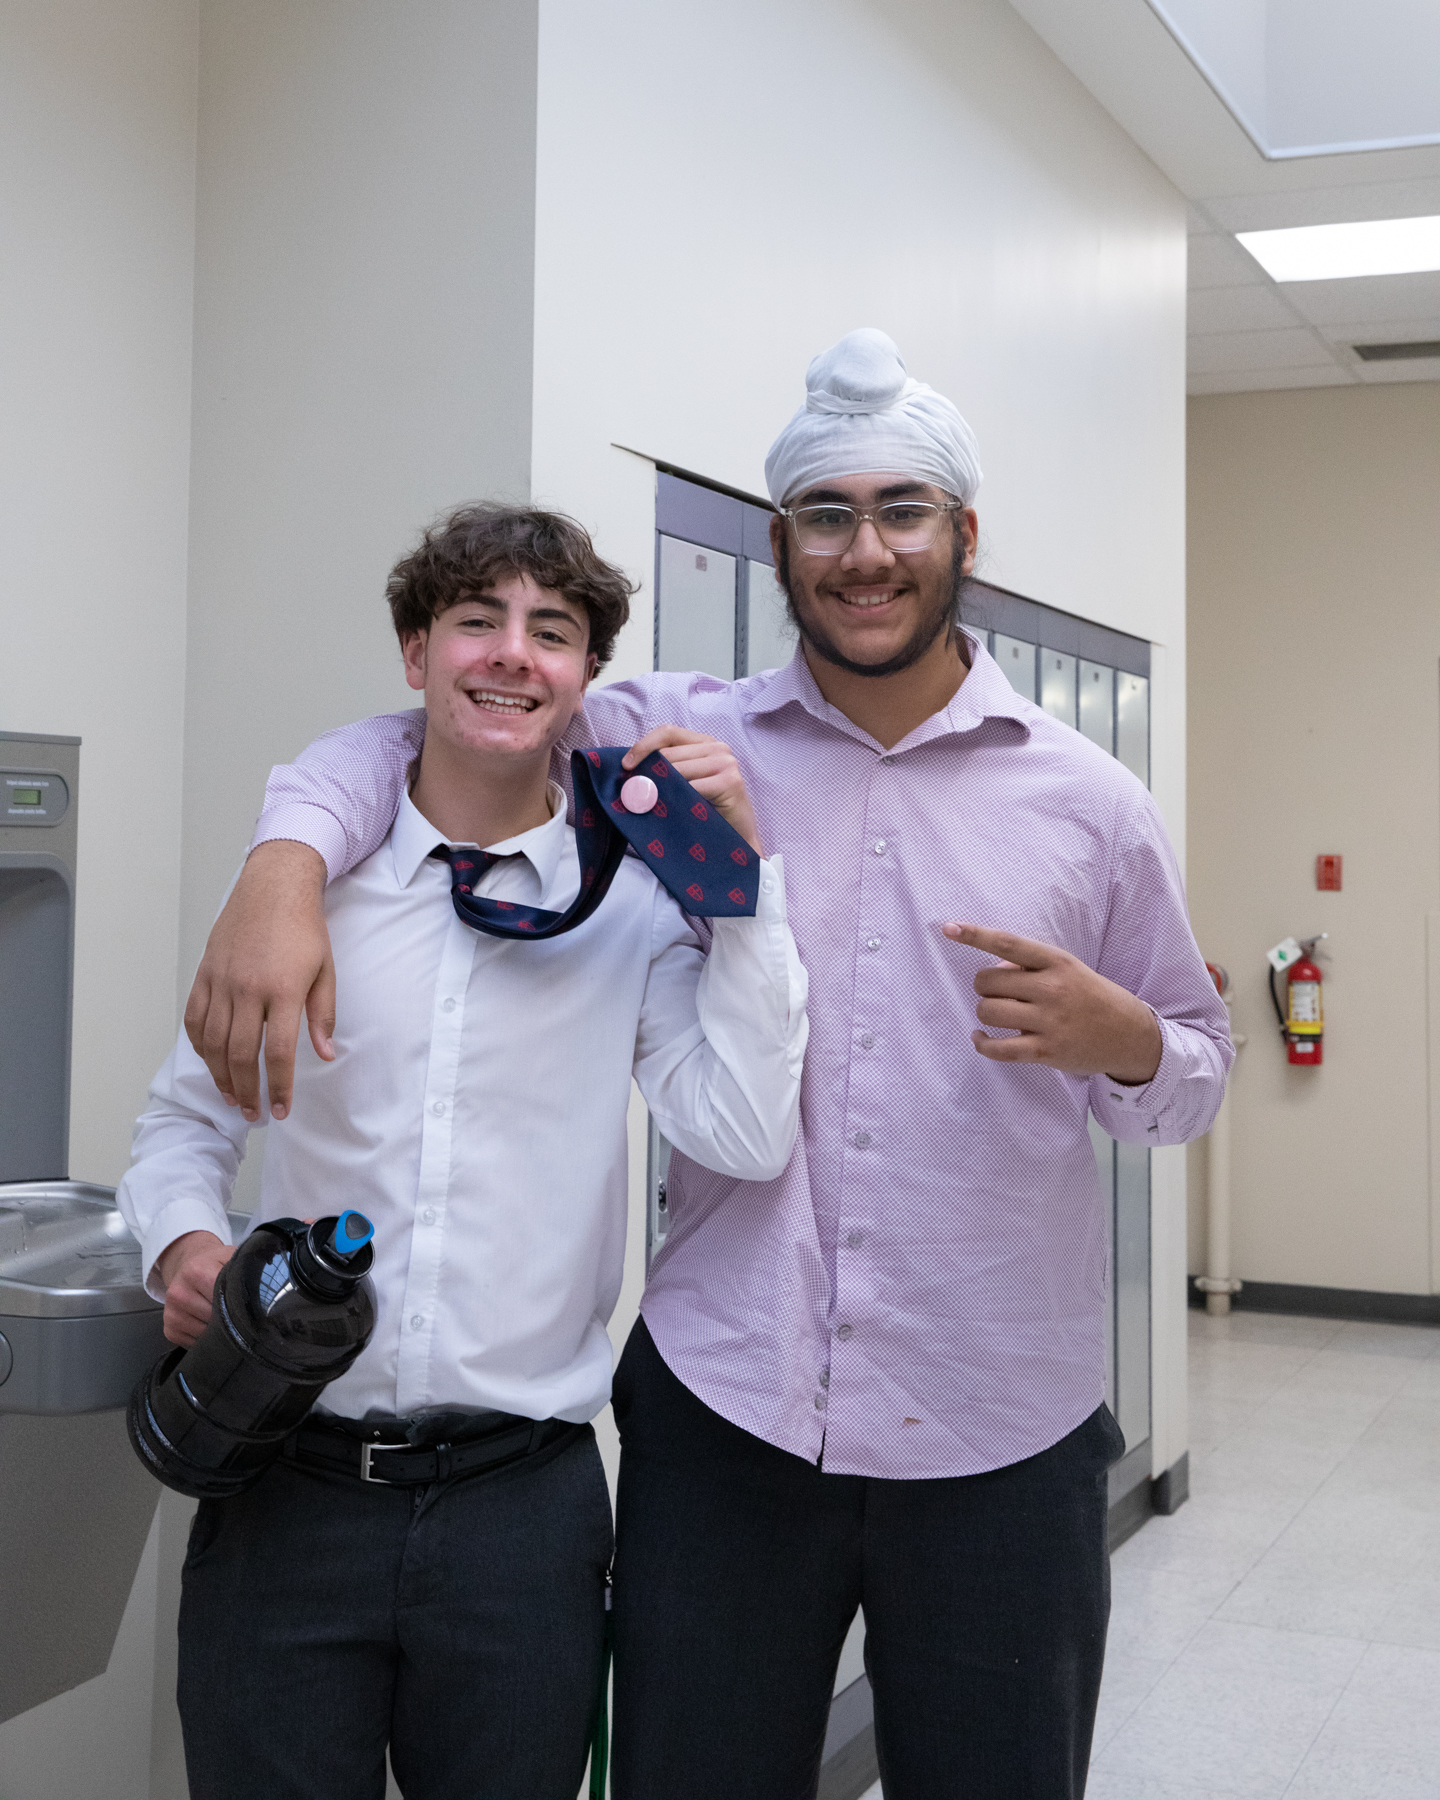 Inno De Cotiis (26) and Sehej Chaggar (26) showing off their pink spirit